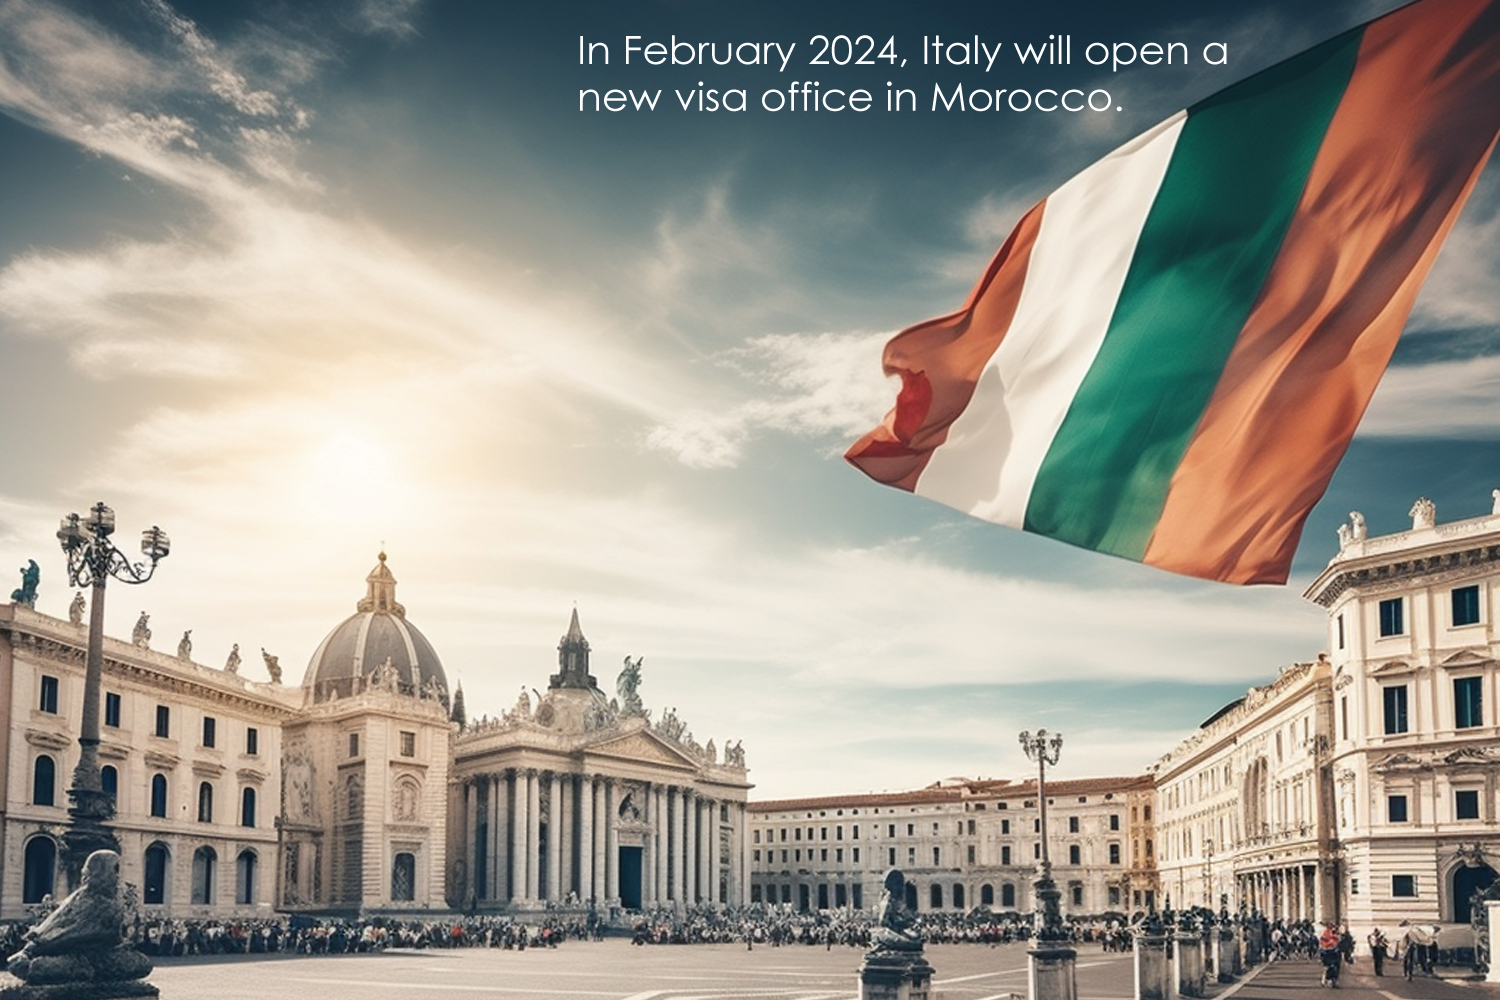 In February 2024, Italy will open a new visa office in Morocco.